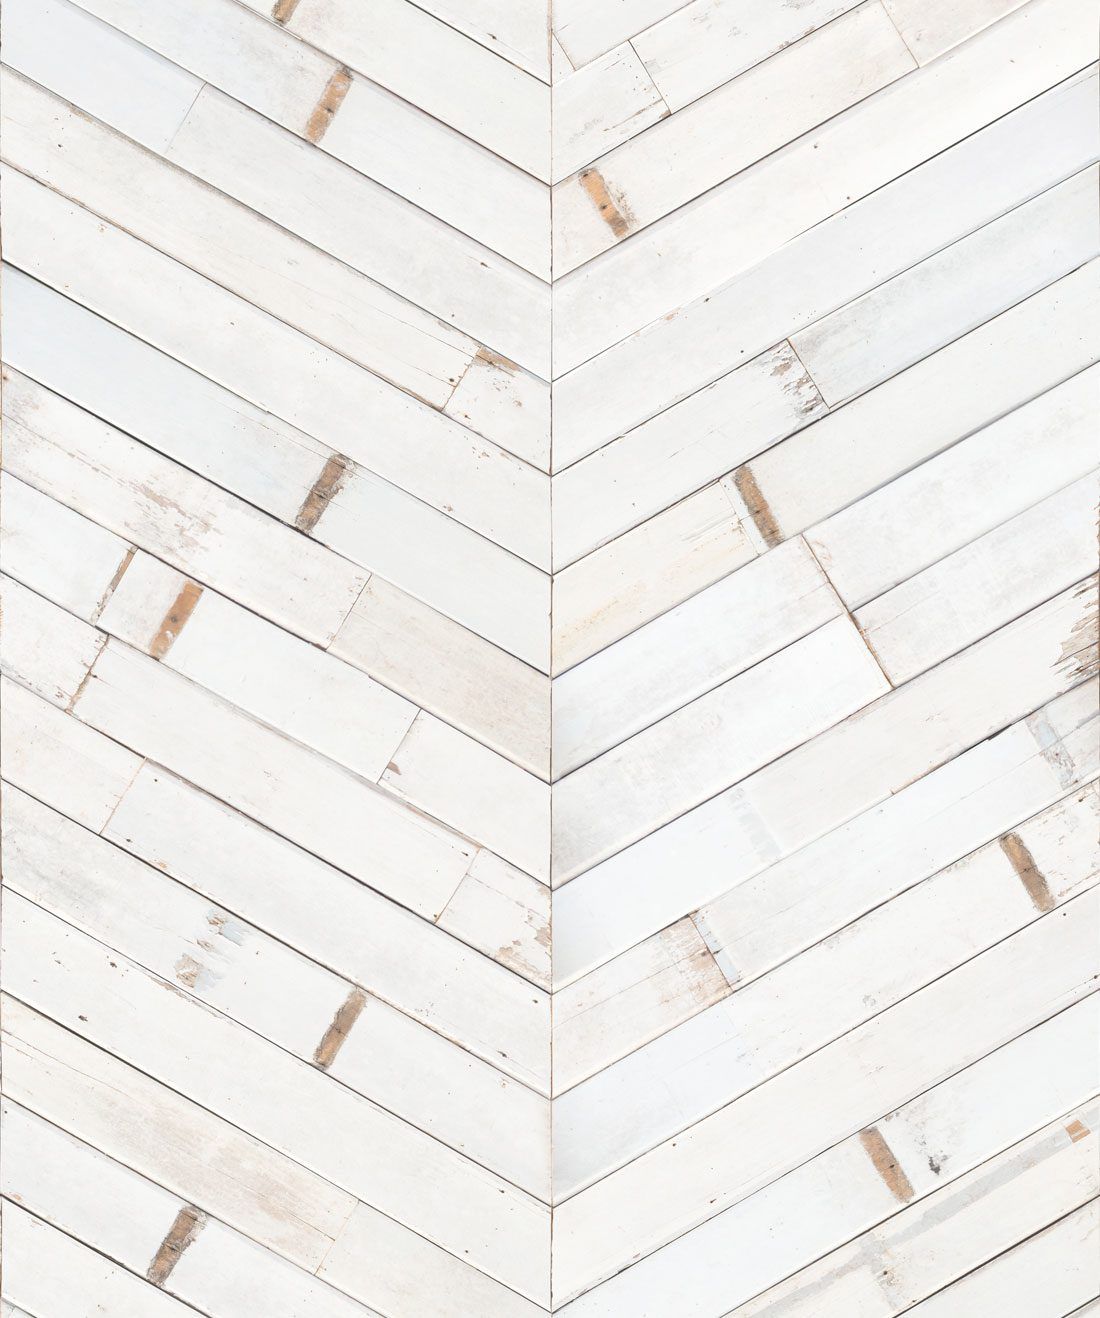 Distressed timber chevron is a white timber chevron wallpaper